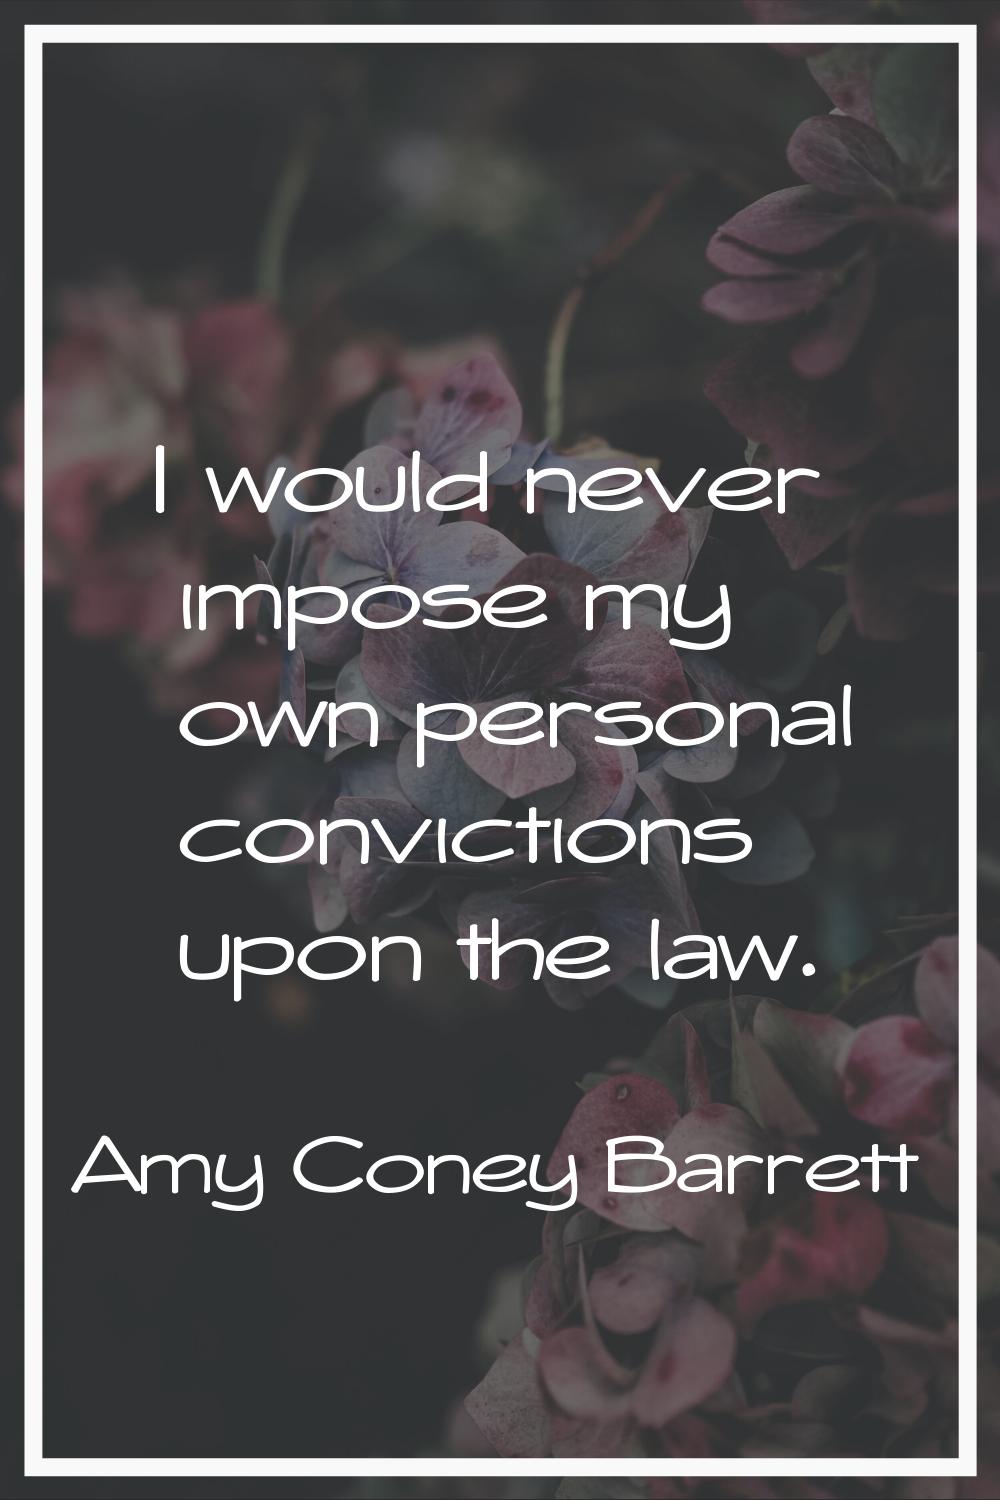 I would never impose my own personal convictions upon the law.